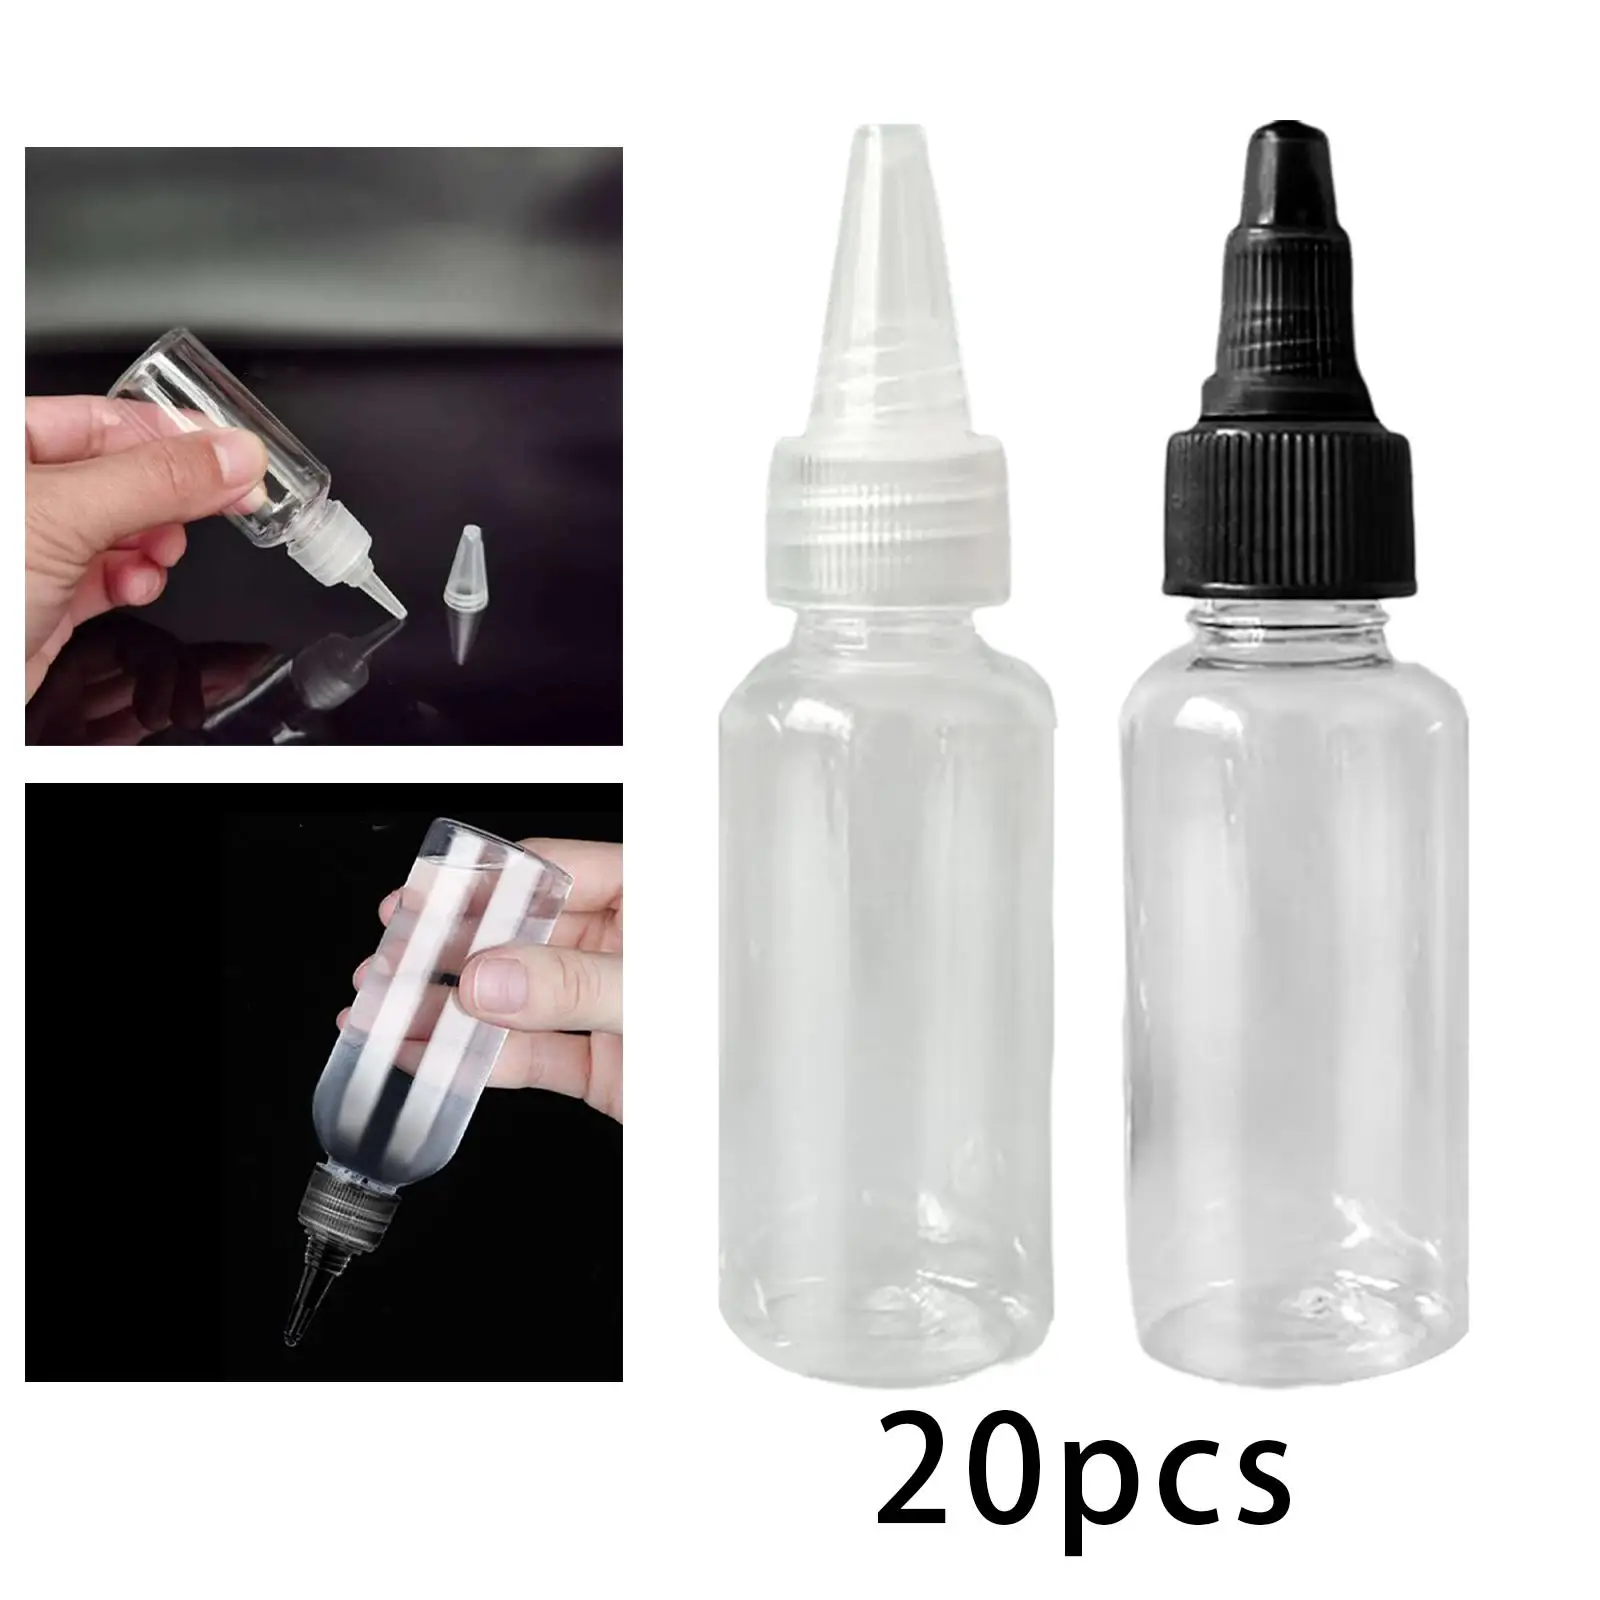 20Pcs Water Bottles Set 30ml with Twist Caps Dispenser Sharp Mouth Pointed Containers for Makeup Glue 